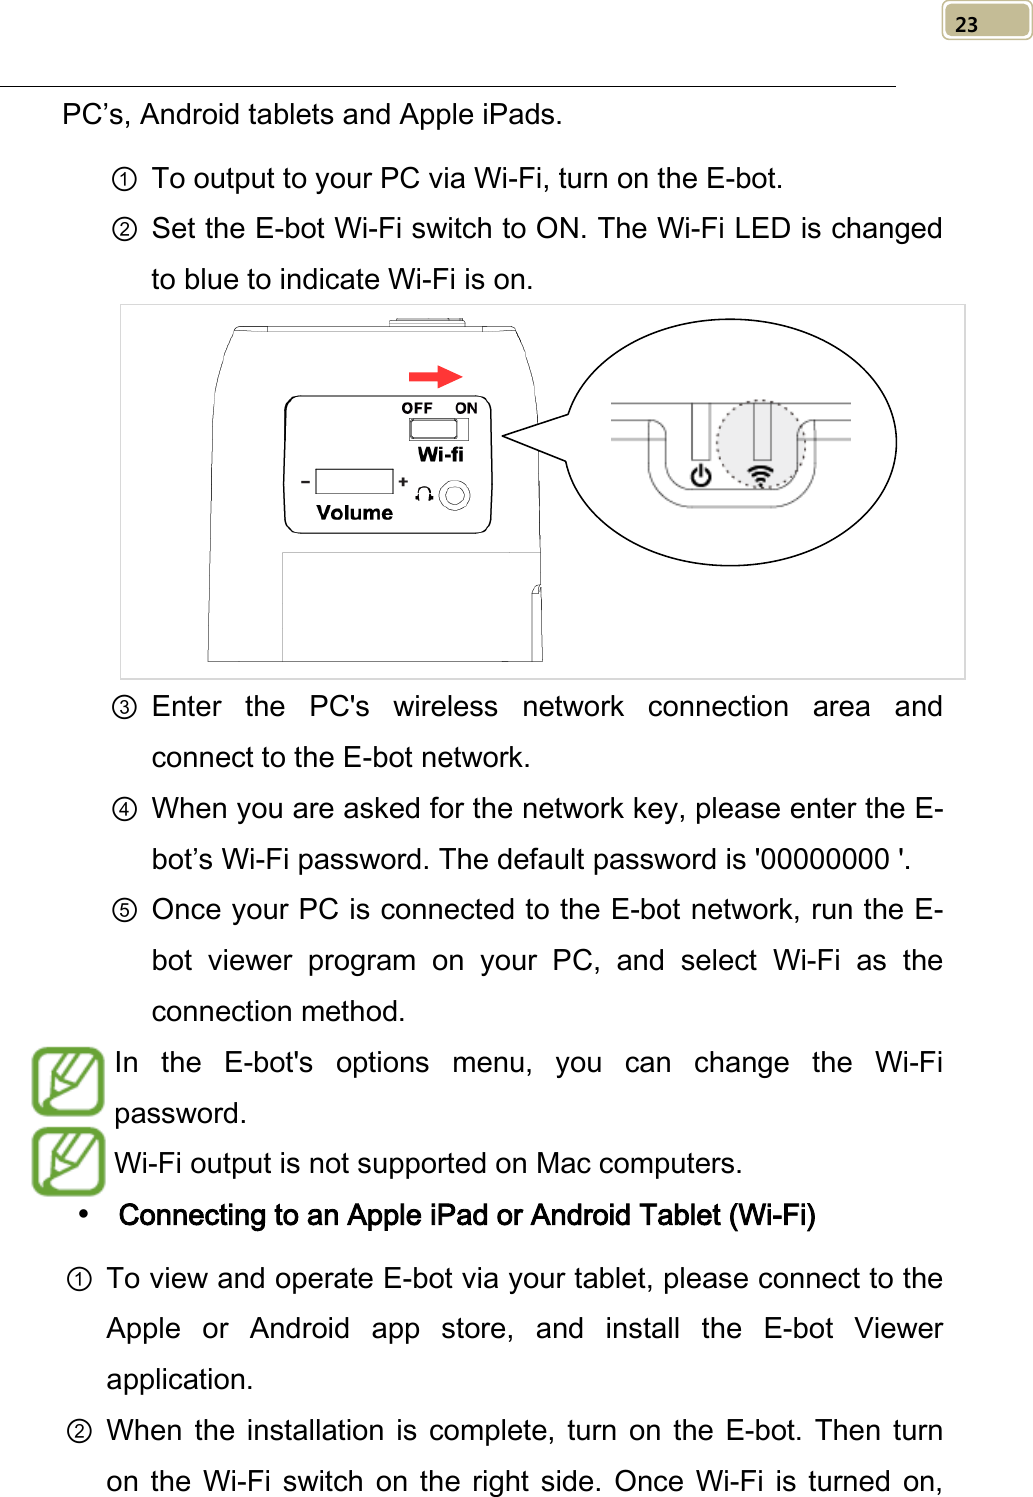   23 PC’s, Android tablets and Apple iPads.   ① To output to your PC via Wi-Fi, turn on the E-bot.   ② Set the E-bot Wi-Fi switch to ON. The Wi-Fi LED is changed to blue to indicate Wi-Fi is on.  ③ Enter the PC&apos;s wireless network connection area and connect to the E-bot network. ④ When you are asked for the network key, please enter the E-bot’s Wi-Fi password. The default password is &apos;00000000 &apos;. ⑤ Once your PC is connected to the E-bot network, run the E-bot  viewer program on your PC, and select Wi-Fi as the connection method. In the E-bot&apos;s options menu, you can change the Wi-Fi password.   Wi-Fi output is not supported on Mac computers.    Connecting to an Apple iPad or Android Tablet (Wi-Fi) ① To view and operate E-bot via your tablet, please connect to the Apple or Android app store, and install the E-bot Viewer application. ② When the installation is complete, turn on the E-bot. Then turn on  the Wi-Fi switch on the right side. Once  Wi-Fi is turned on,  